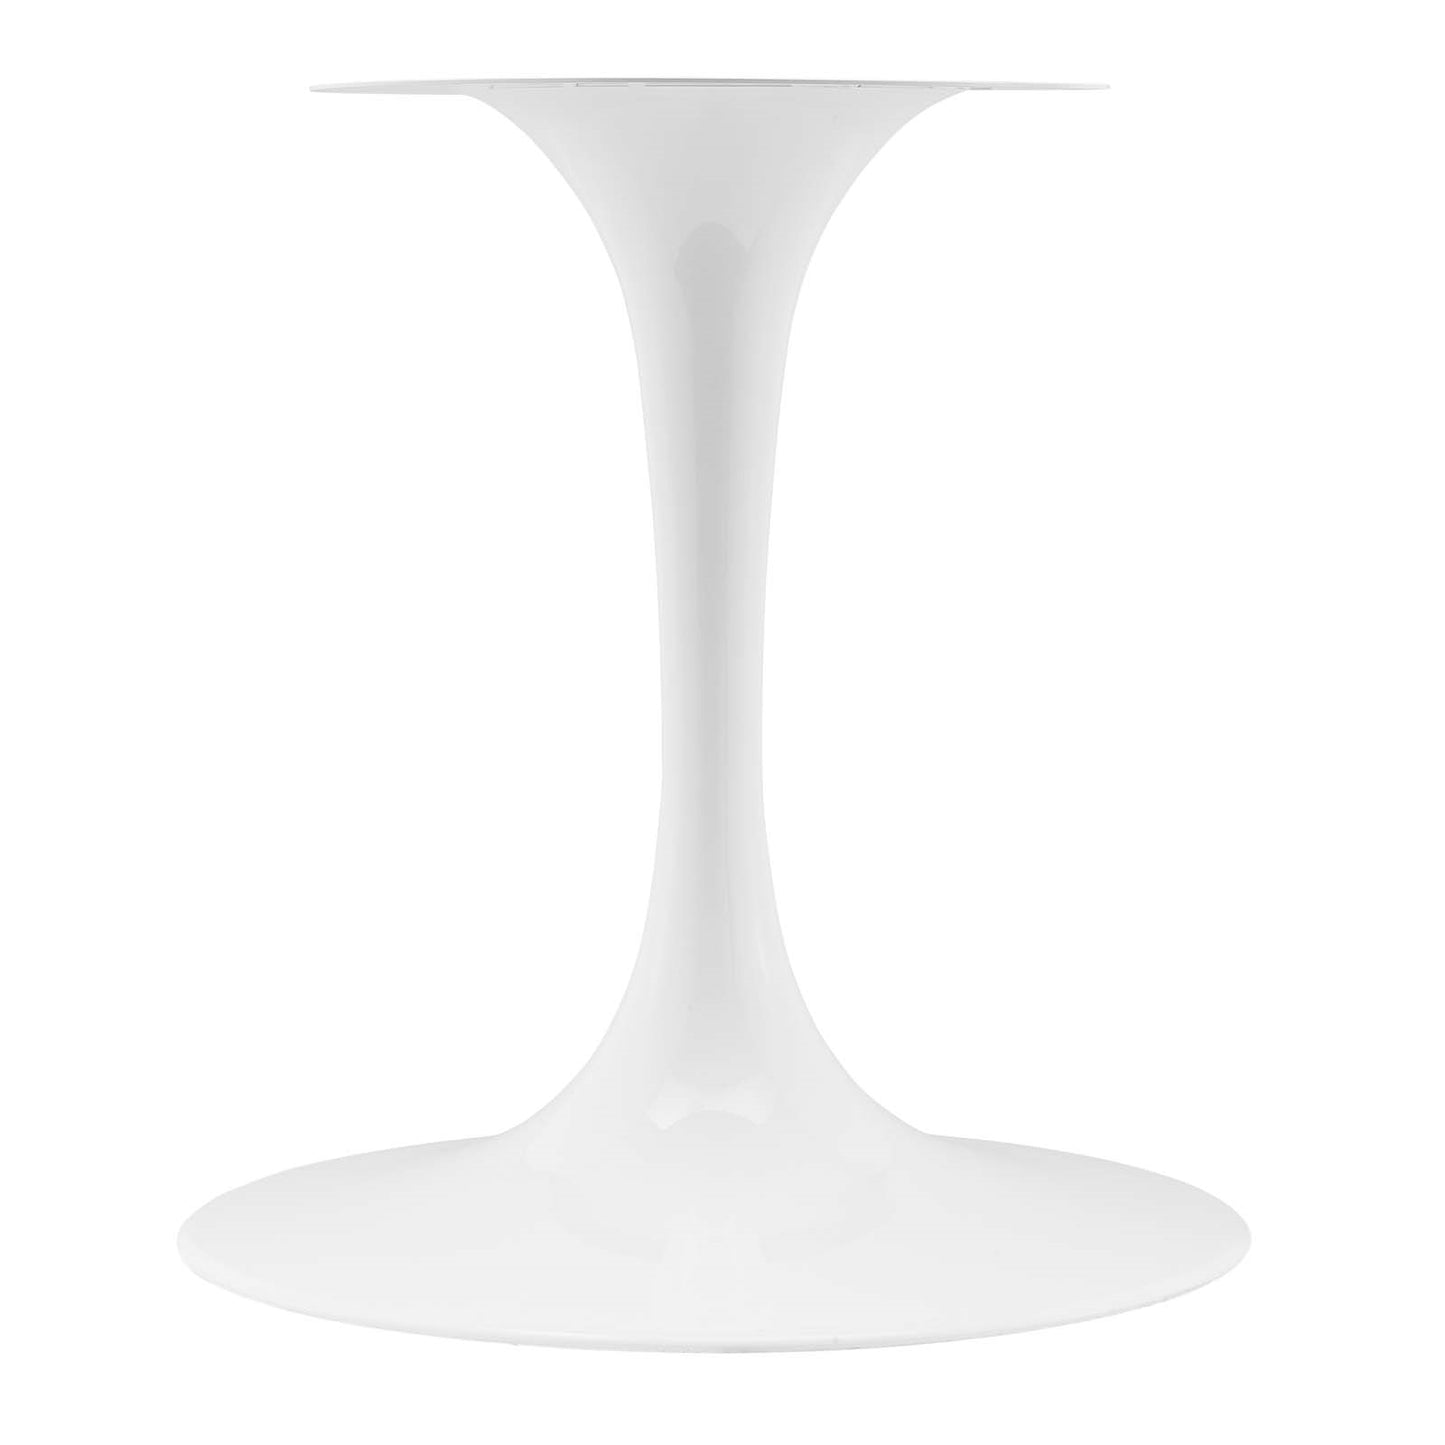 Tulip Style 78" Oval White Natural Dining Table